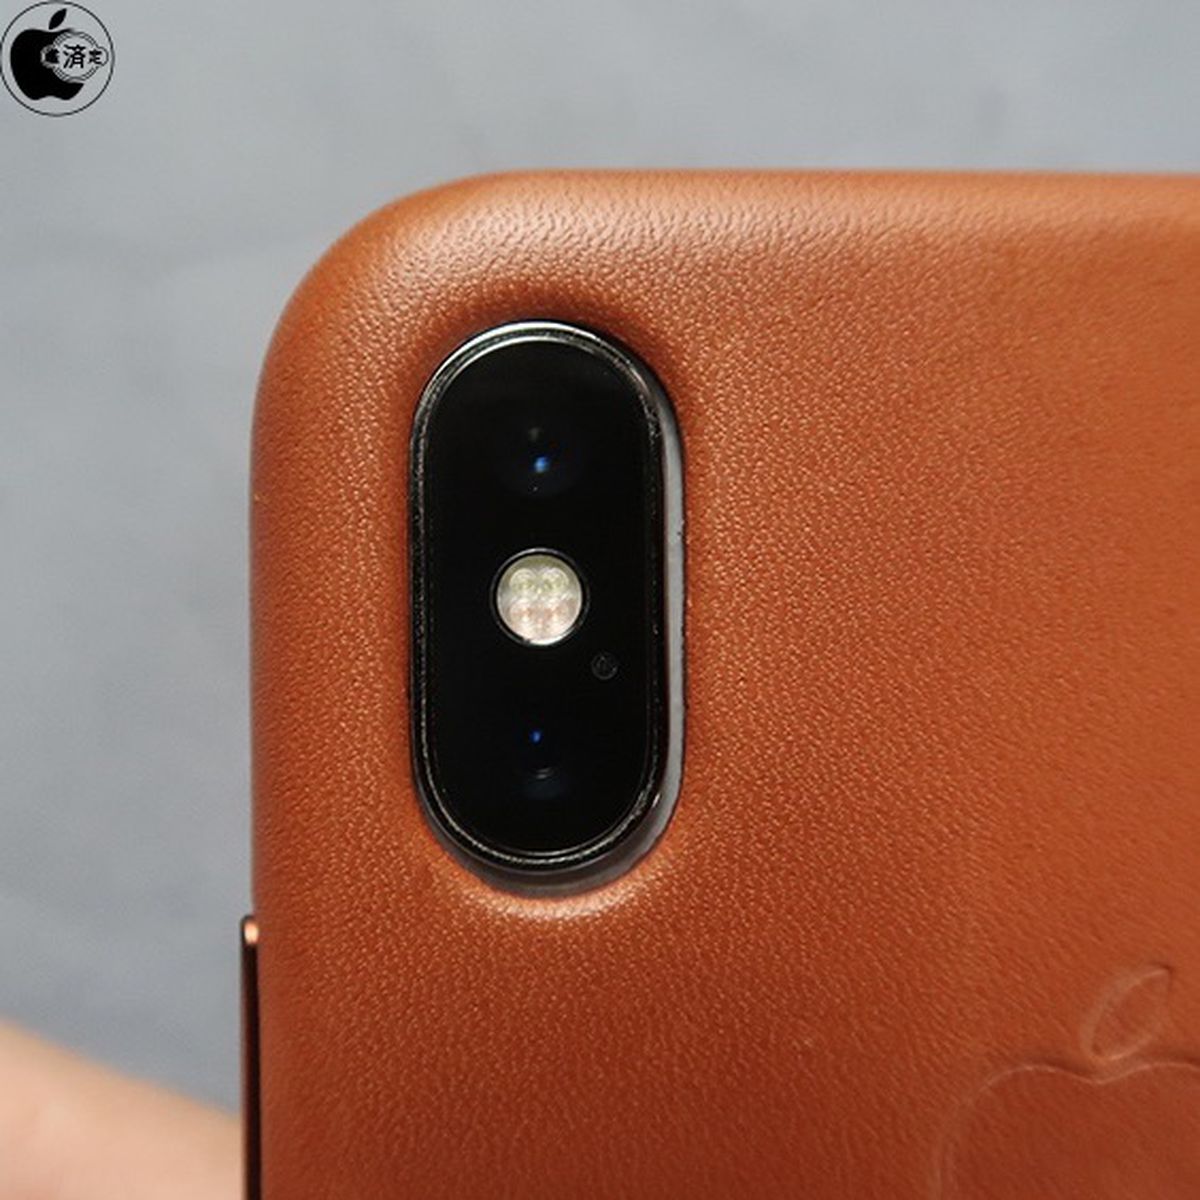 iPhone X Cases May Have Slightly Imperfect Fit on iPhone XS Due to